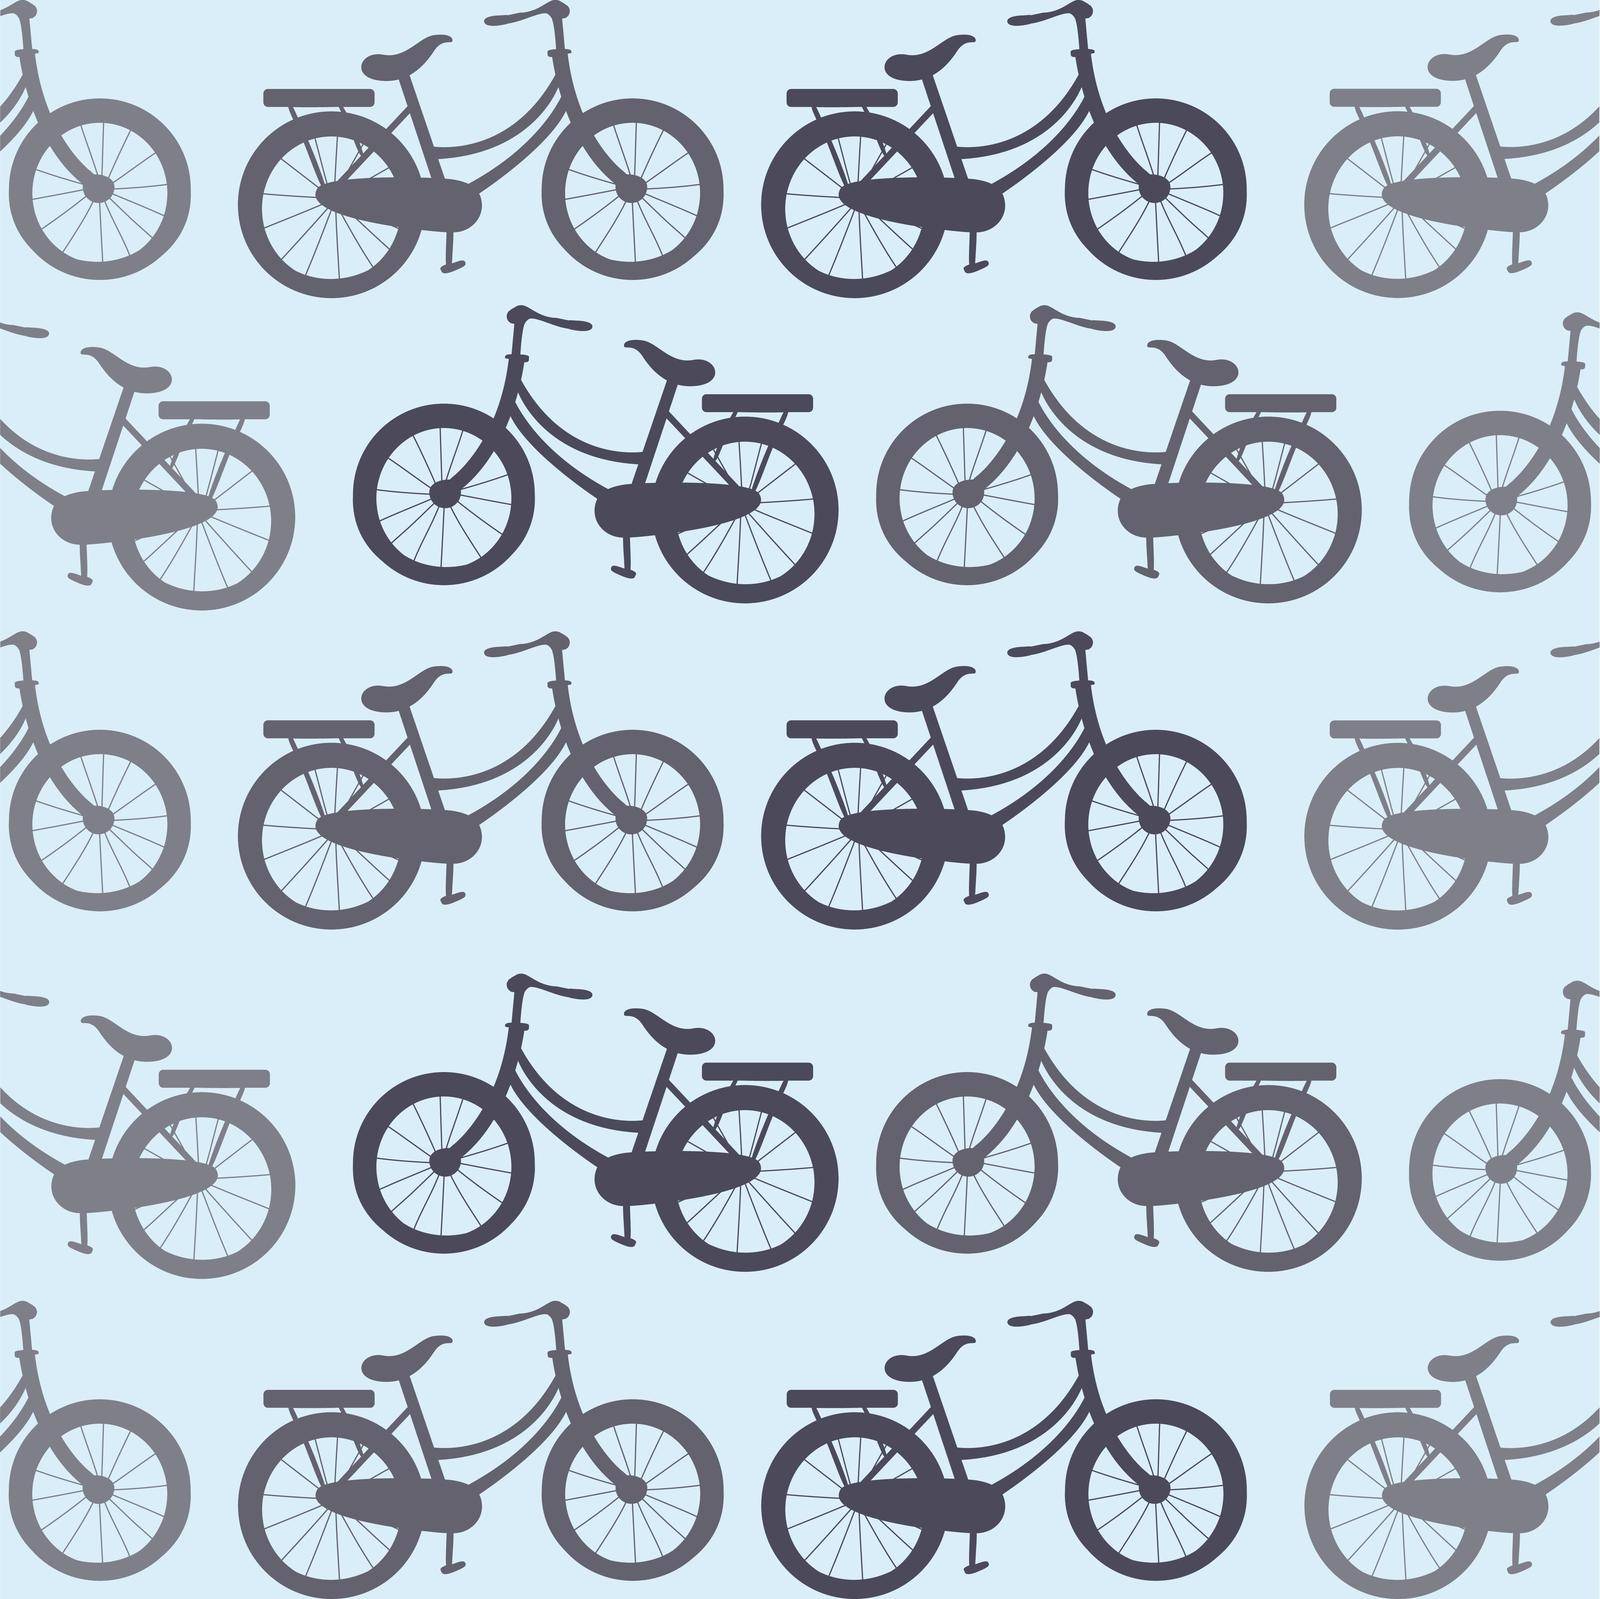 bicycle pattern by focus_bell